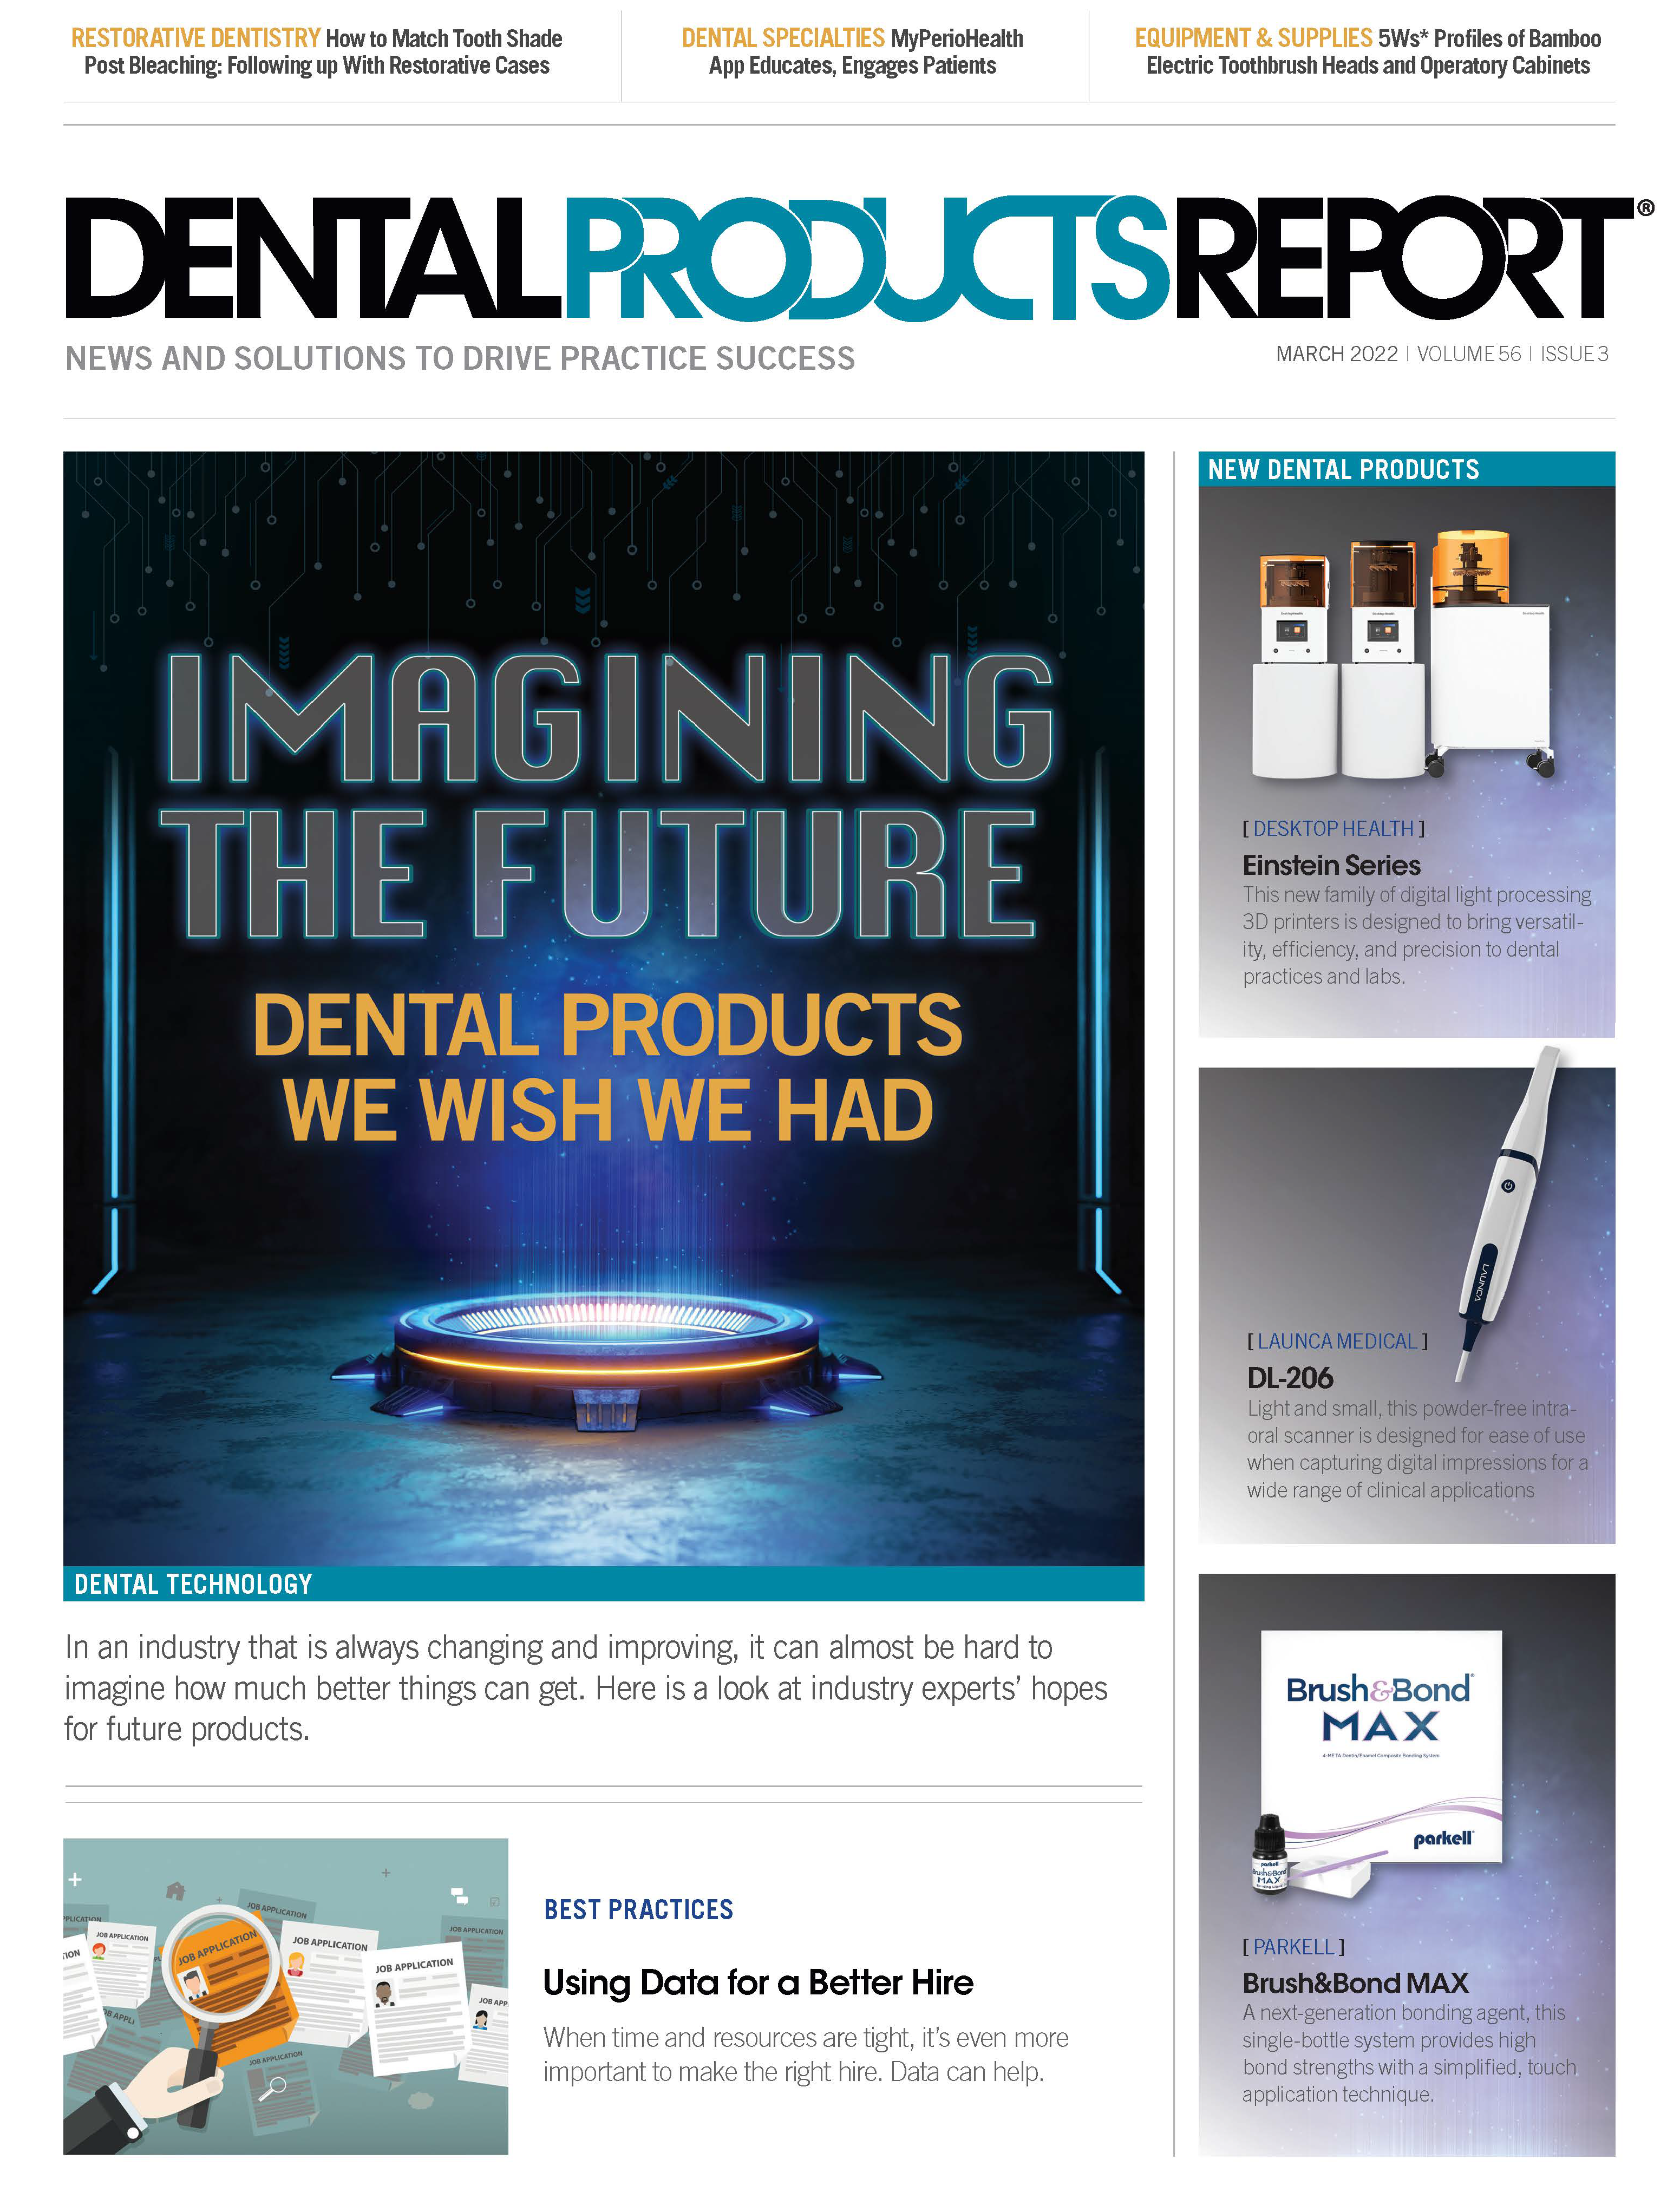 Dental Products Report March 2022 Issue Cover - Imagining the Future - Dental Products We Wish We Had